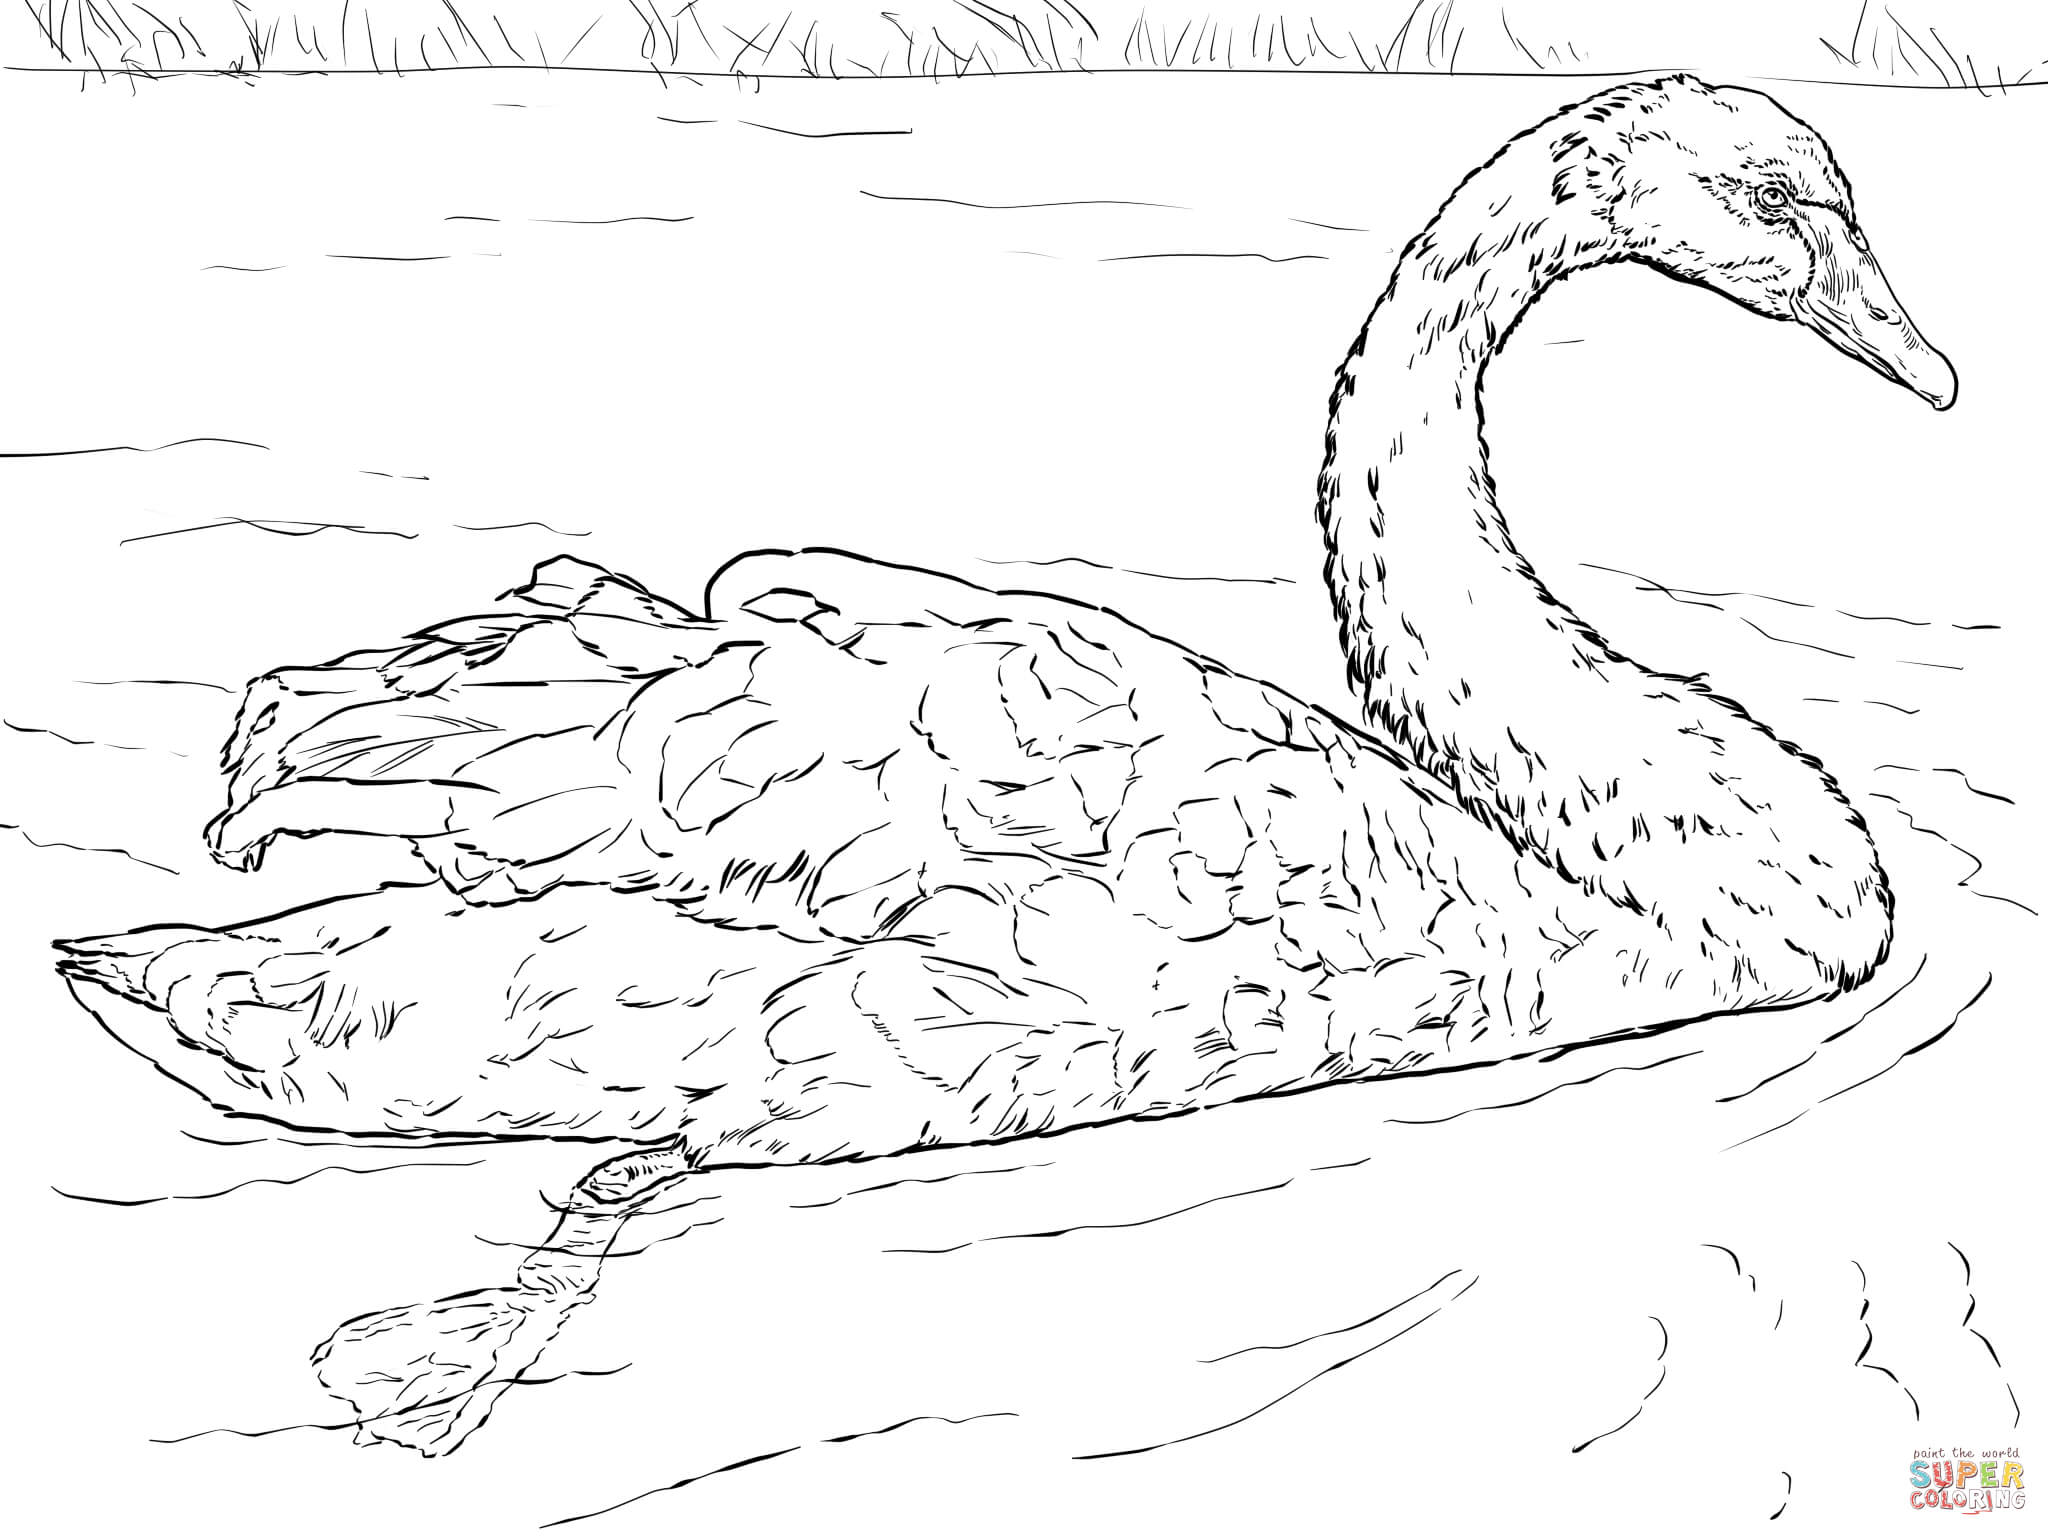 Black Swan coloring page | Free Printable Coloring Pages